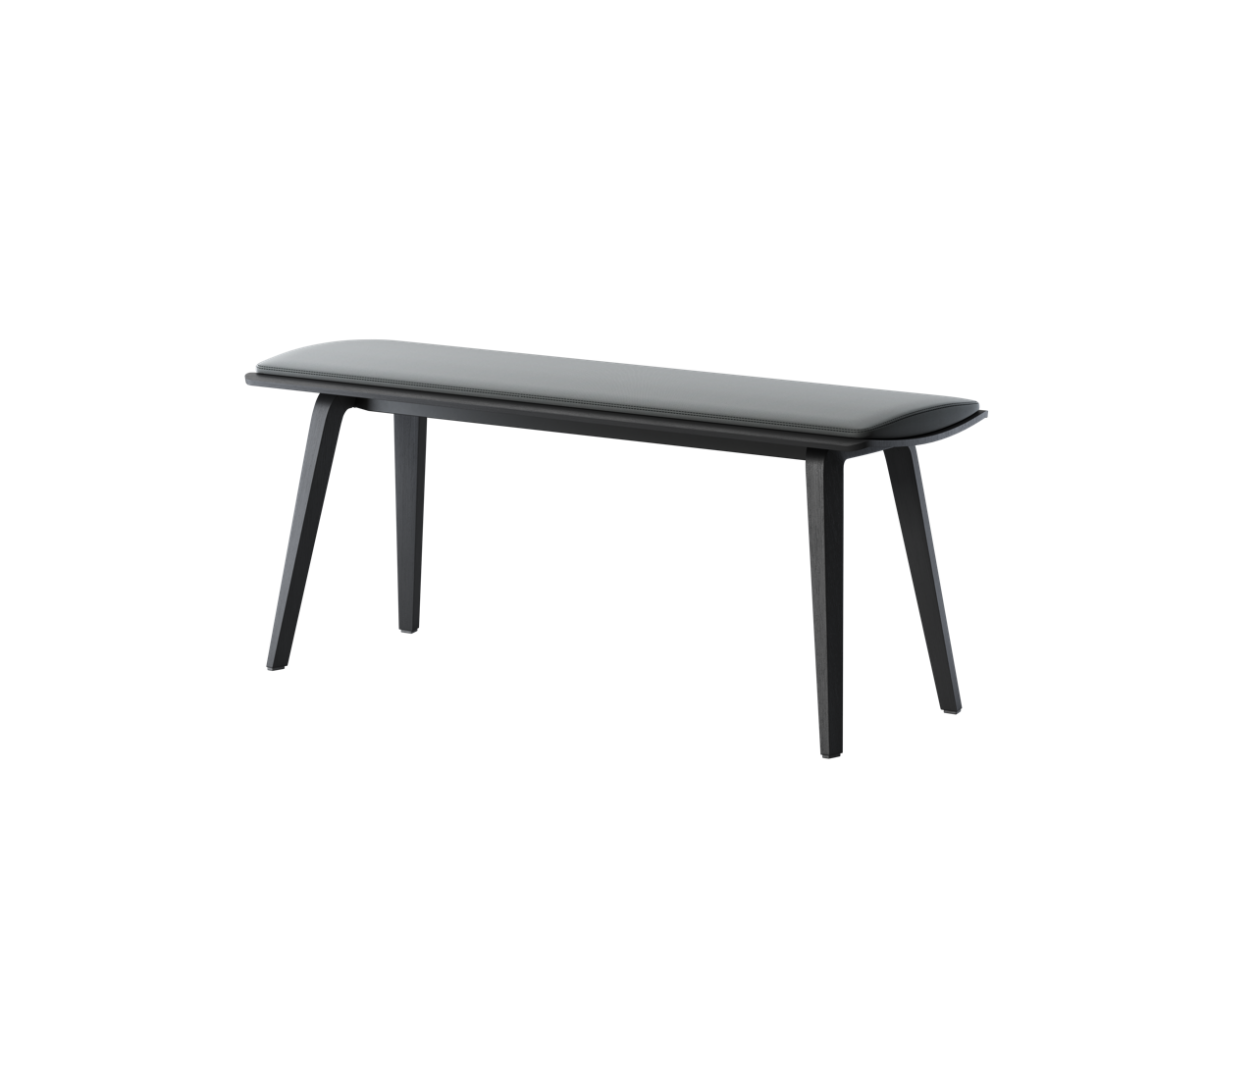 OCEE&FOUR – Stools & Benches – Share Bench – Packshot Image(23) Large